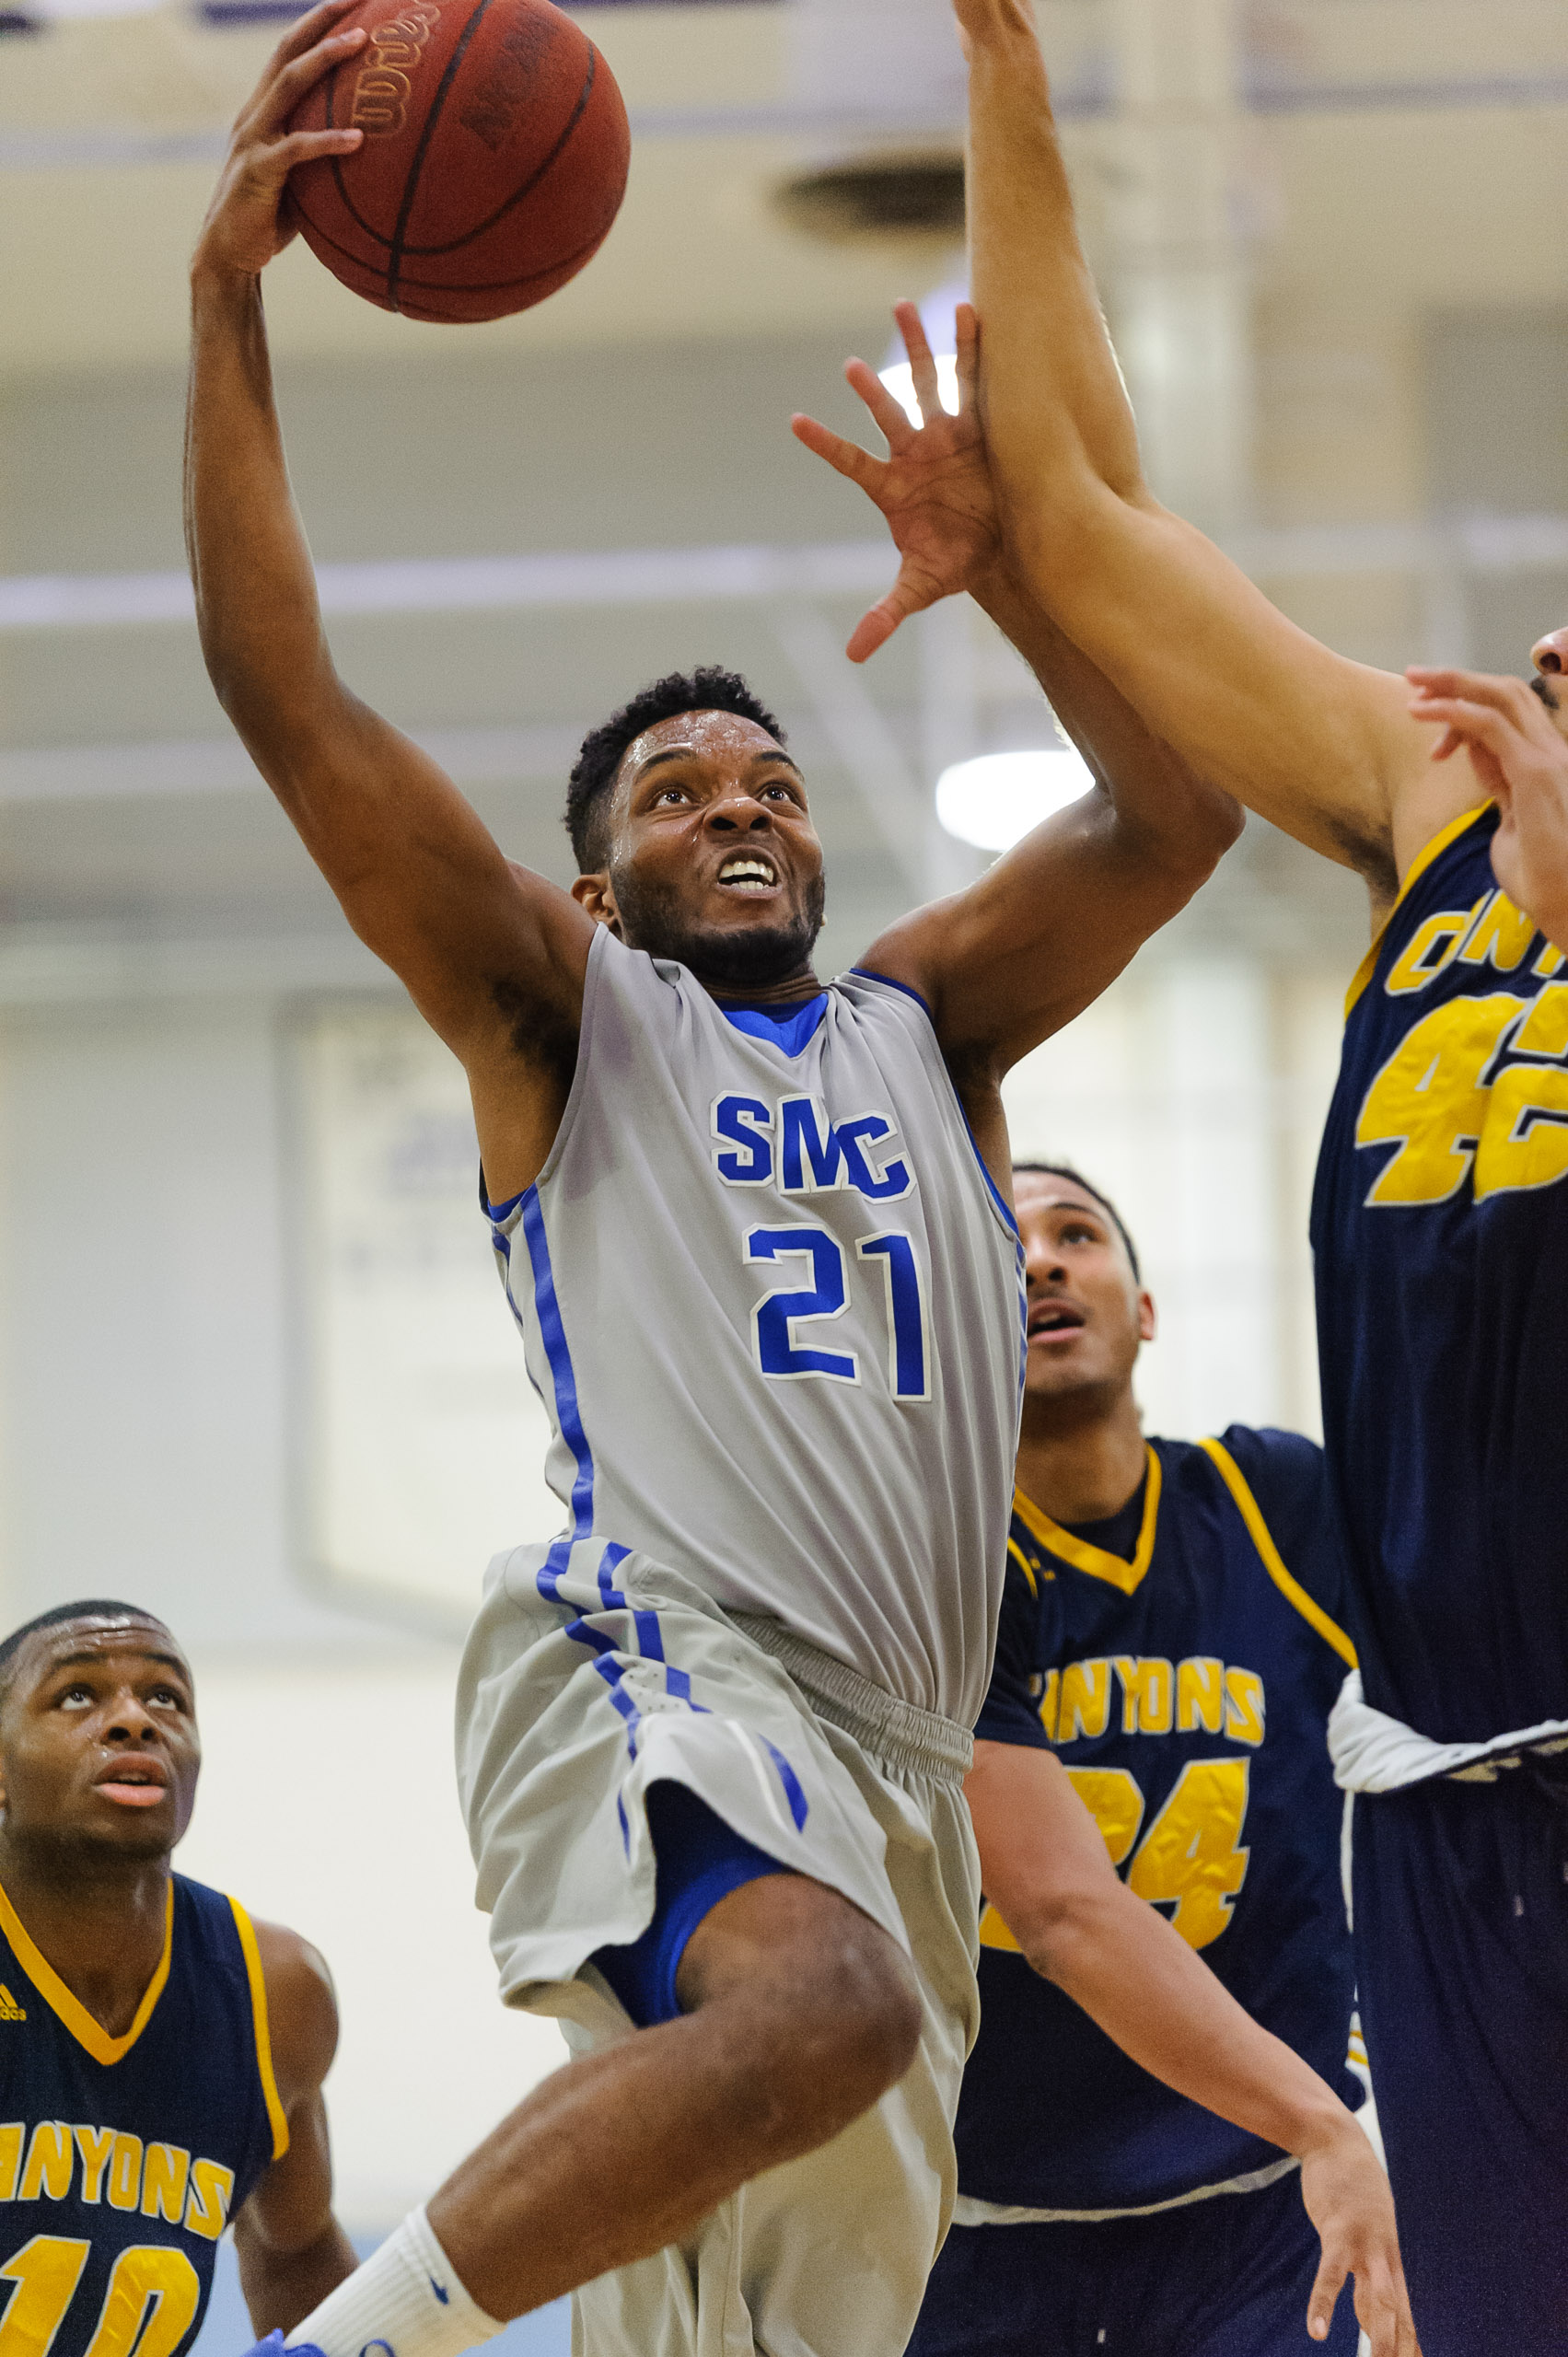  Forward Khalil Taylor (21) of Santa Monica College goes up for a contested layup as Philip Webb (42,Right) of the College of the Canyons attempts to block Taylor. The Santa Monica College Corsairs lose the game 74-72 to the College of the Canyons Co